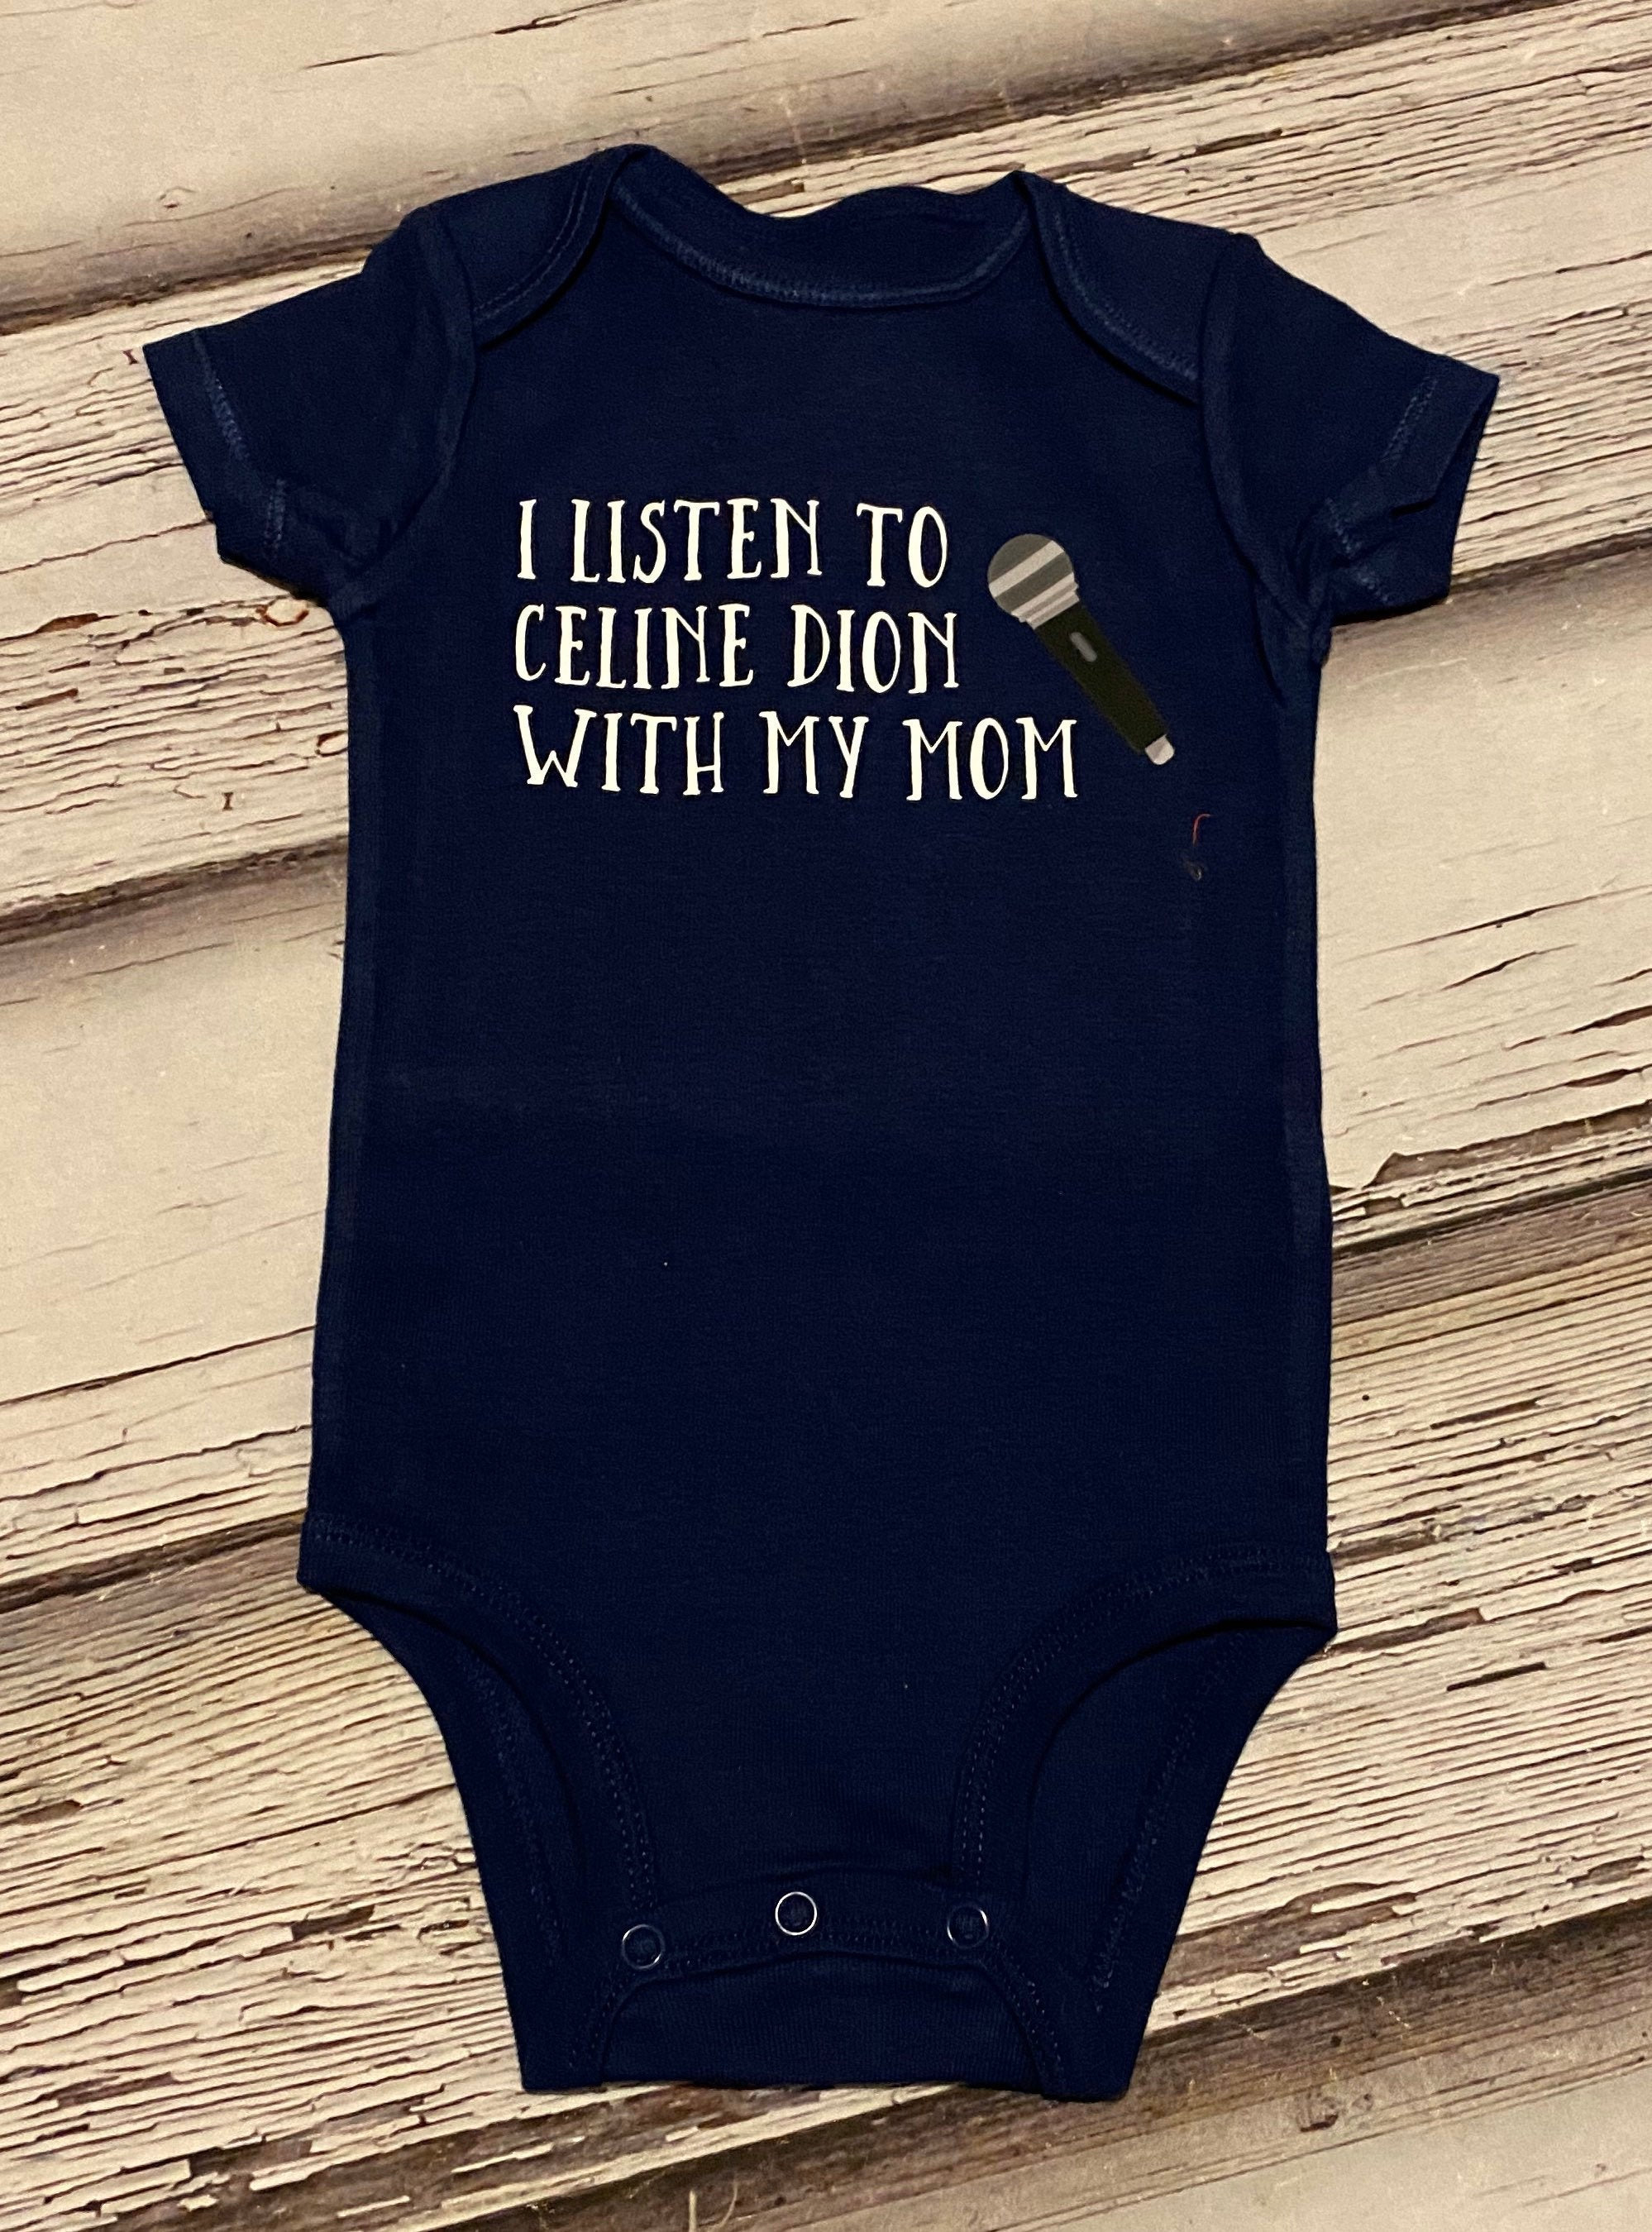 I listen to Celine dion with my Mom baby bodysuit microphone | Etsy België